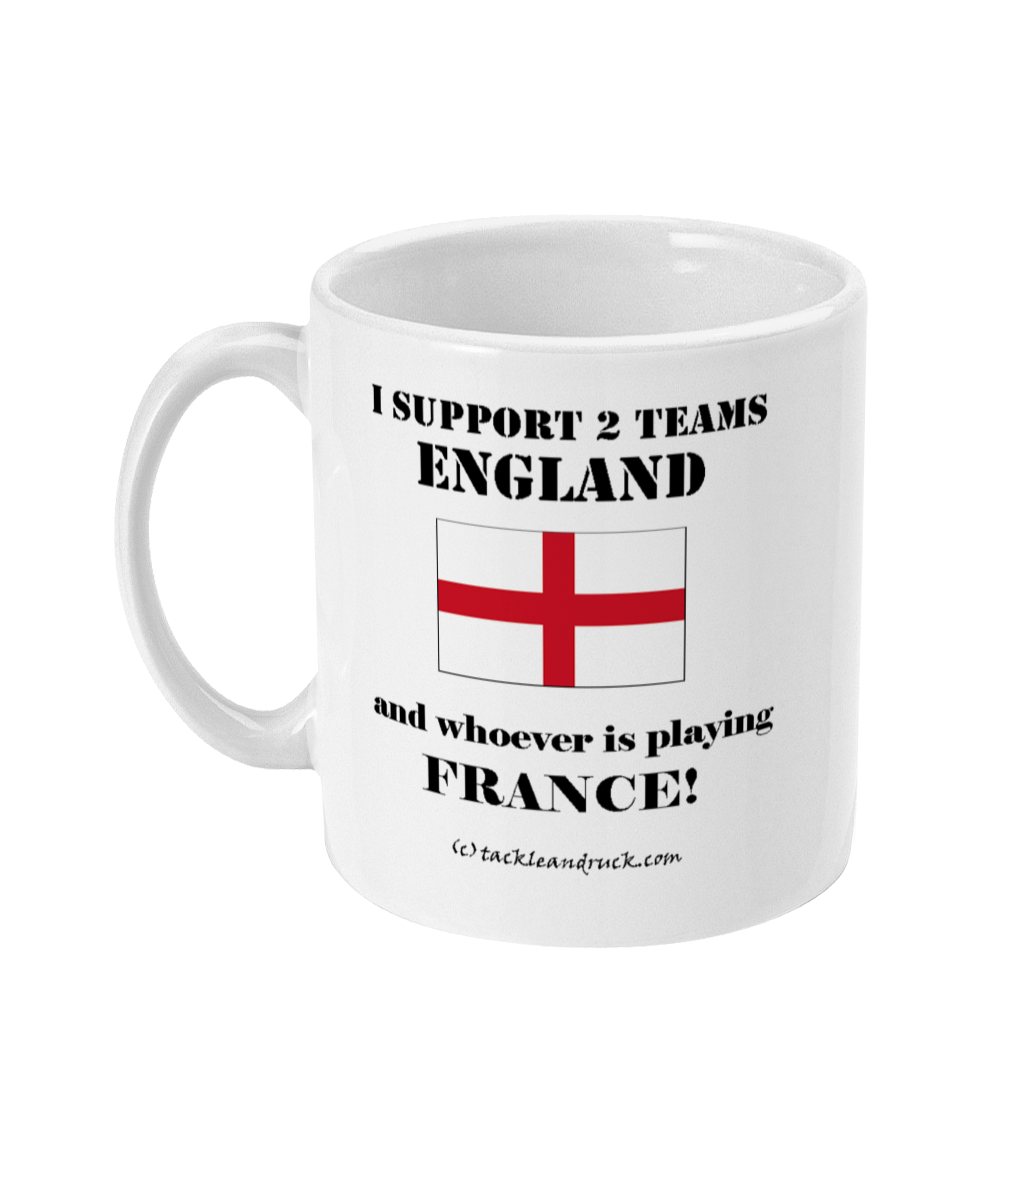 Exclusive England Rugby Mugs - I support 2 Teams England and whoever is playing France Left side